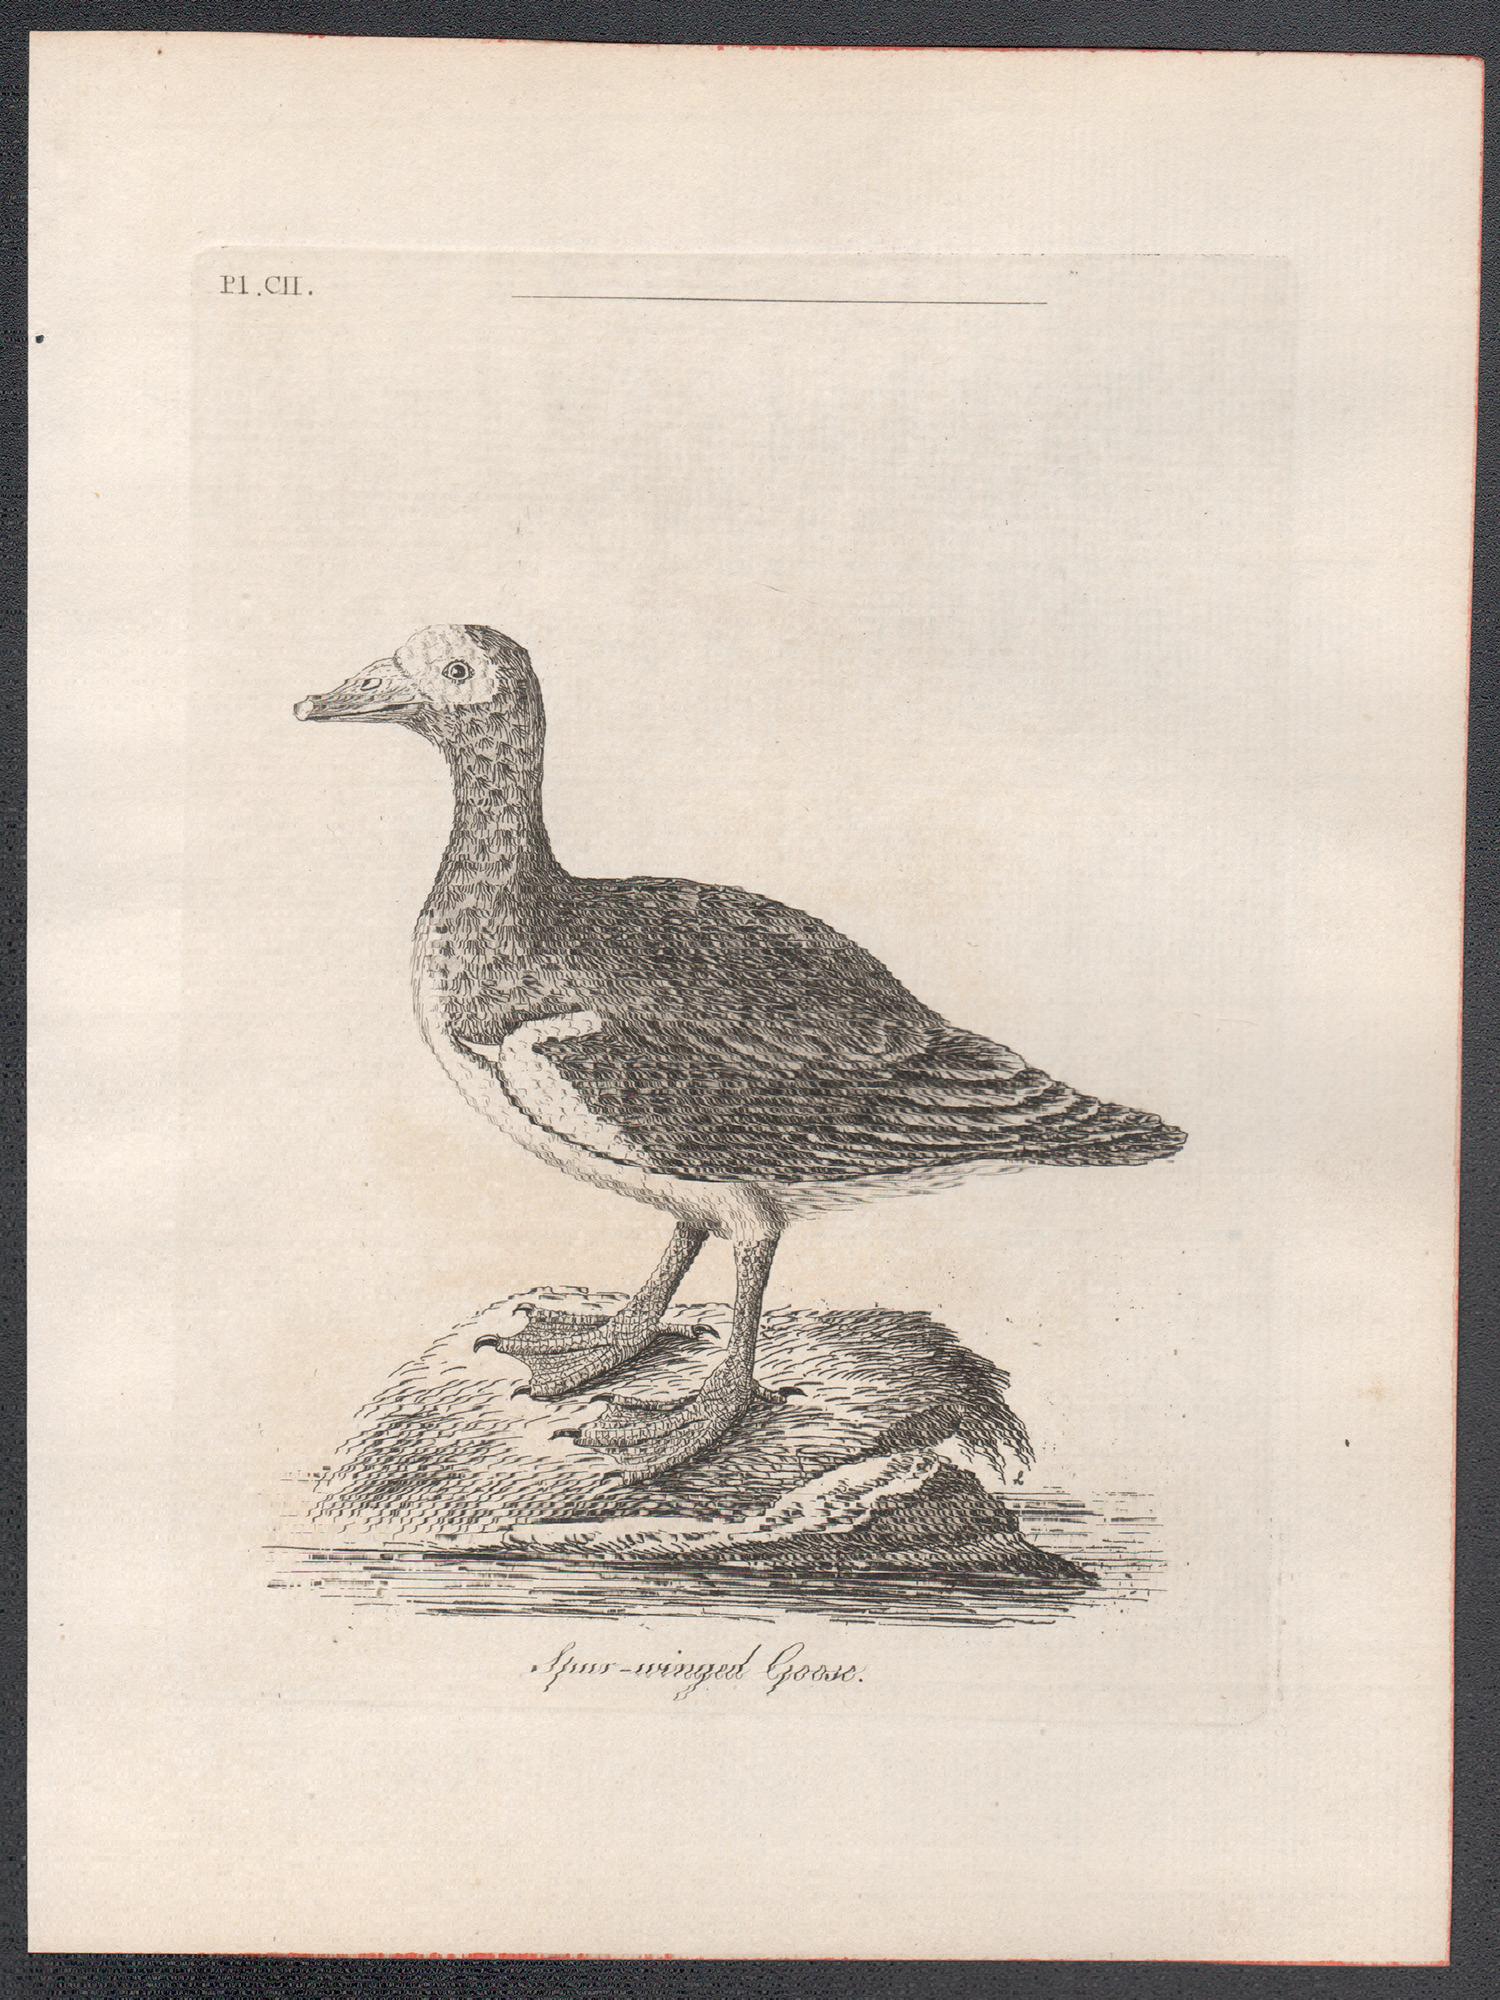 Spur-winged Goose, 18th century bird engraving by John Latham For Sale 1